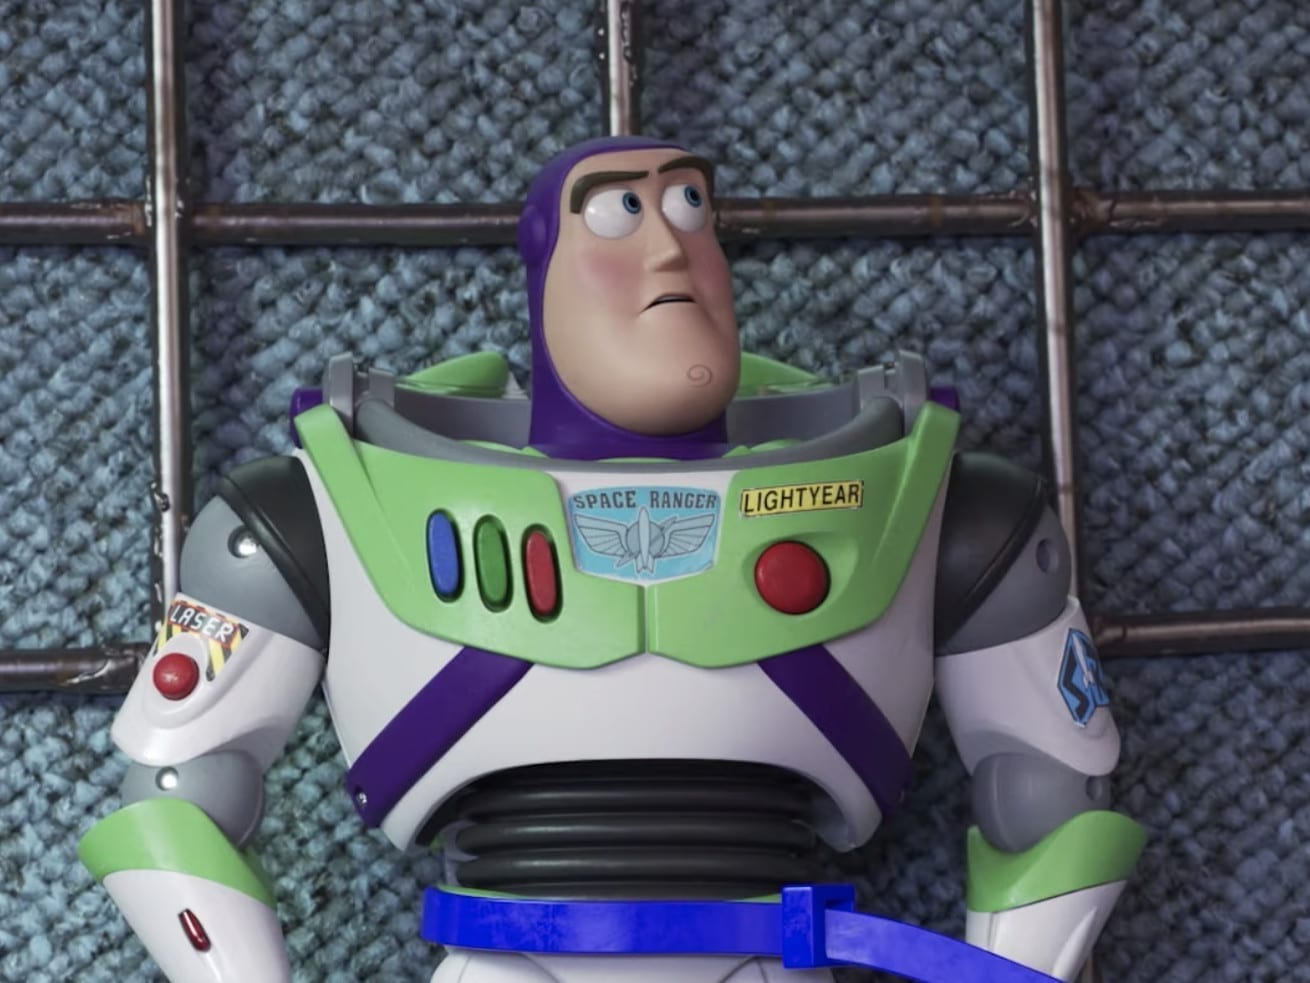 Toy Story 4 Super Bowl trailer: Key and Peele’s new characters torment Buzz Lightyear